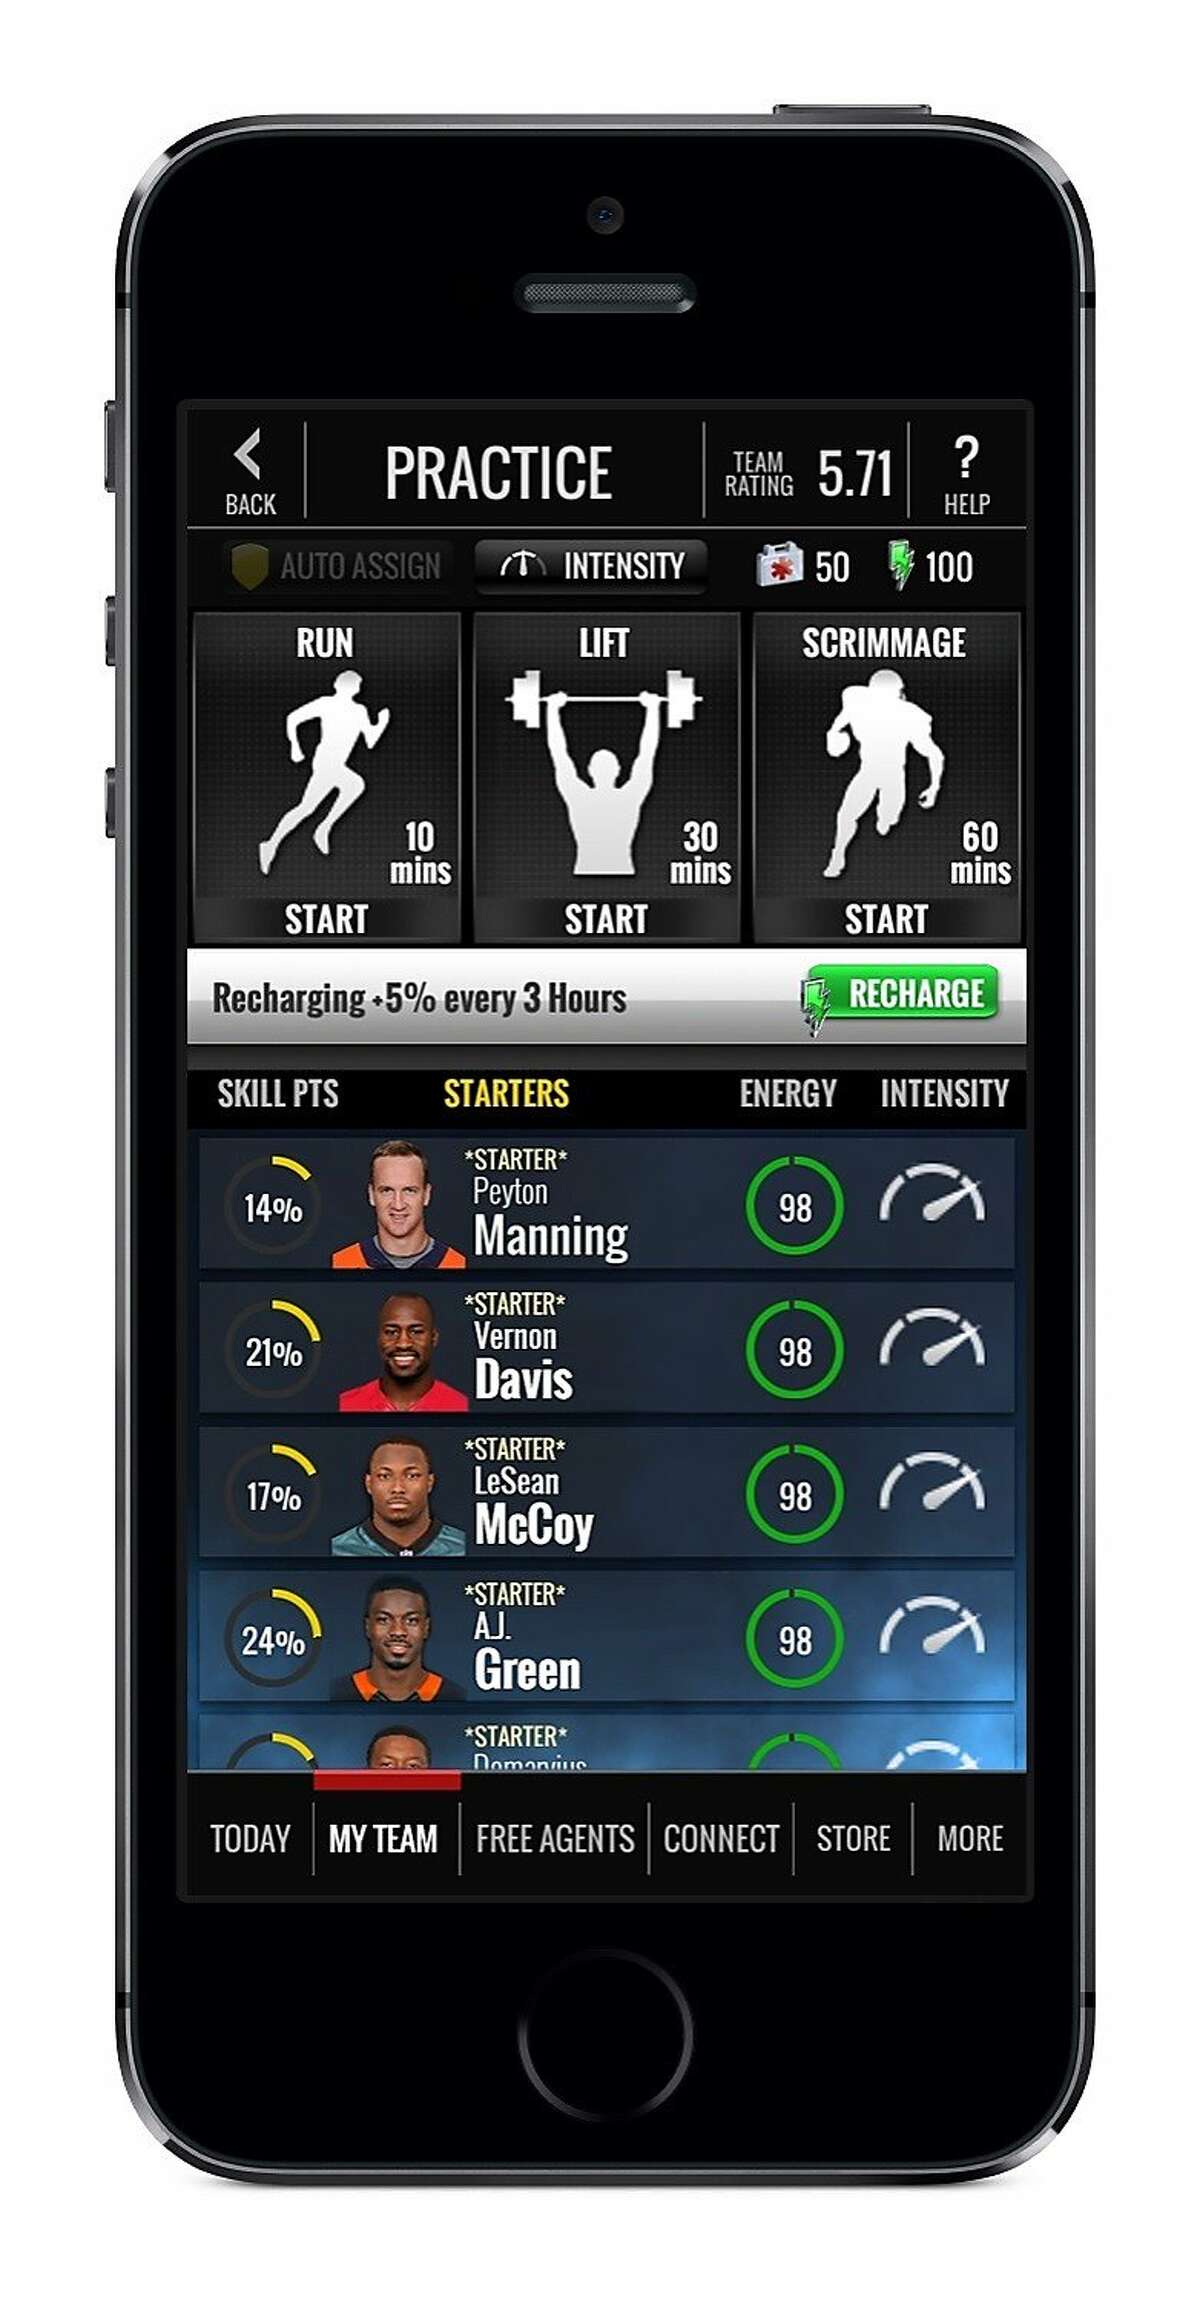 Zynga released its first sports game, a mobile game called "NFL Showdown." This screenshot shows how team managers can improve their player's skills through conditioning and practice